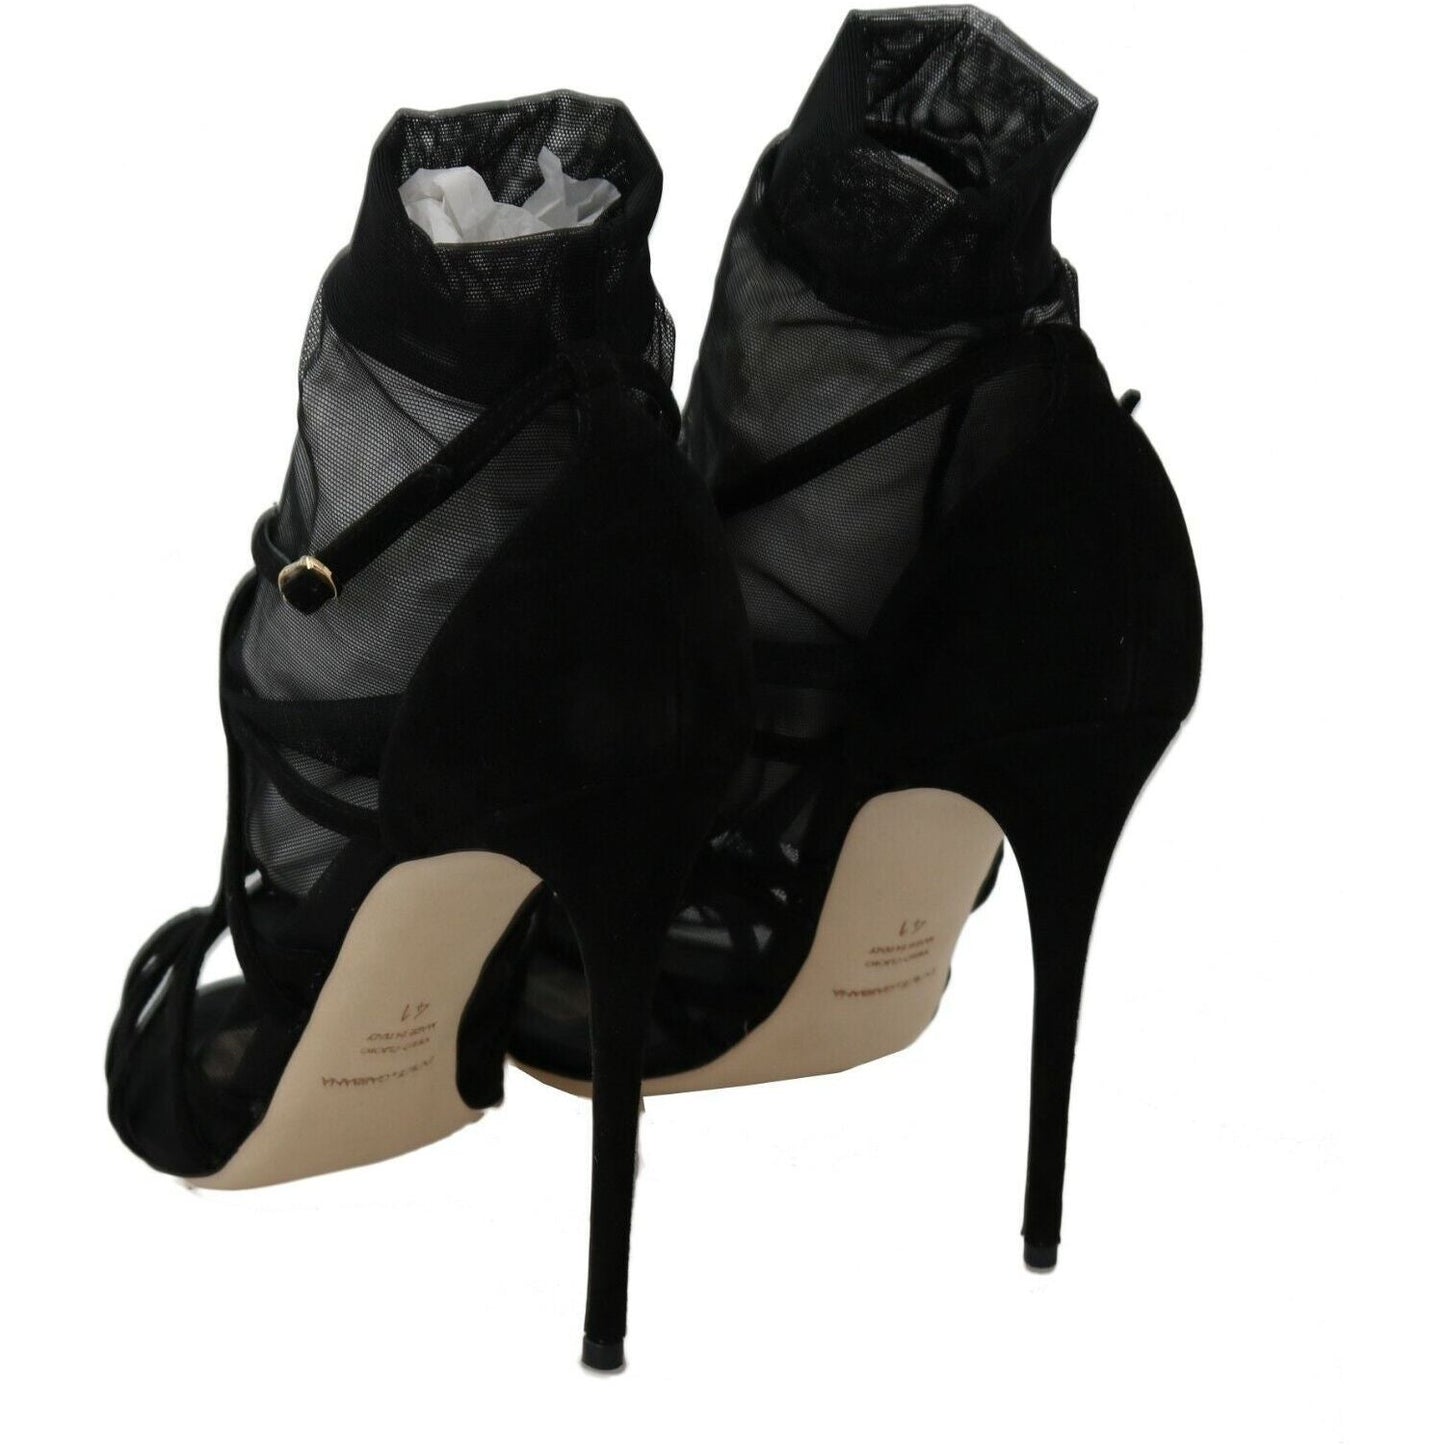 Dolce & Gabbana Black Suede Tulle Ankle Boot Sandals Heeled Sandals black-suede-tulle-ankle-boots-sandal-shoes